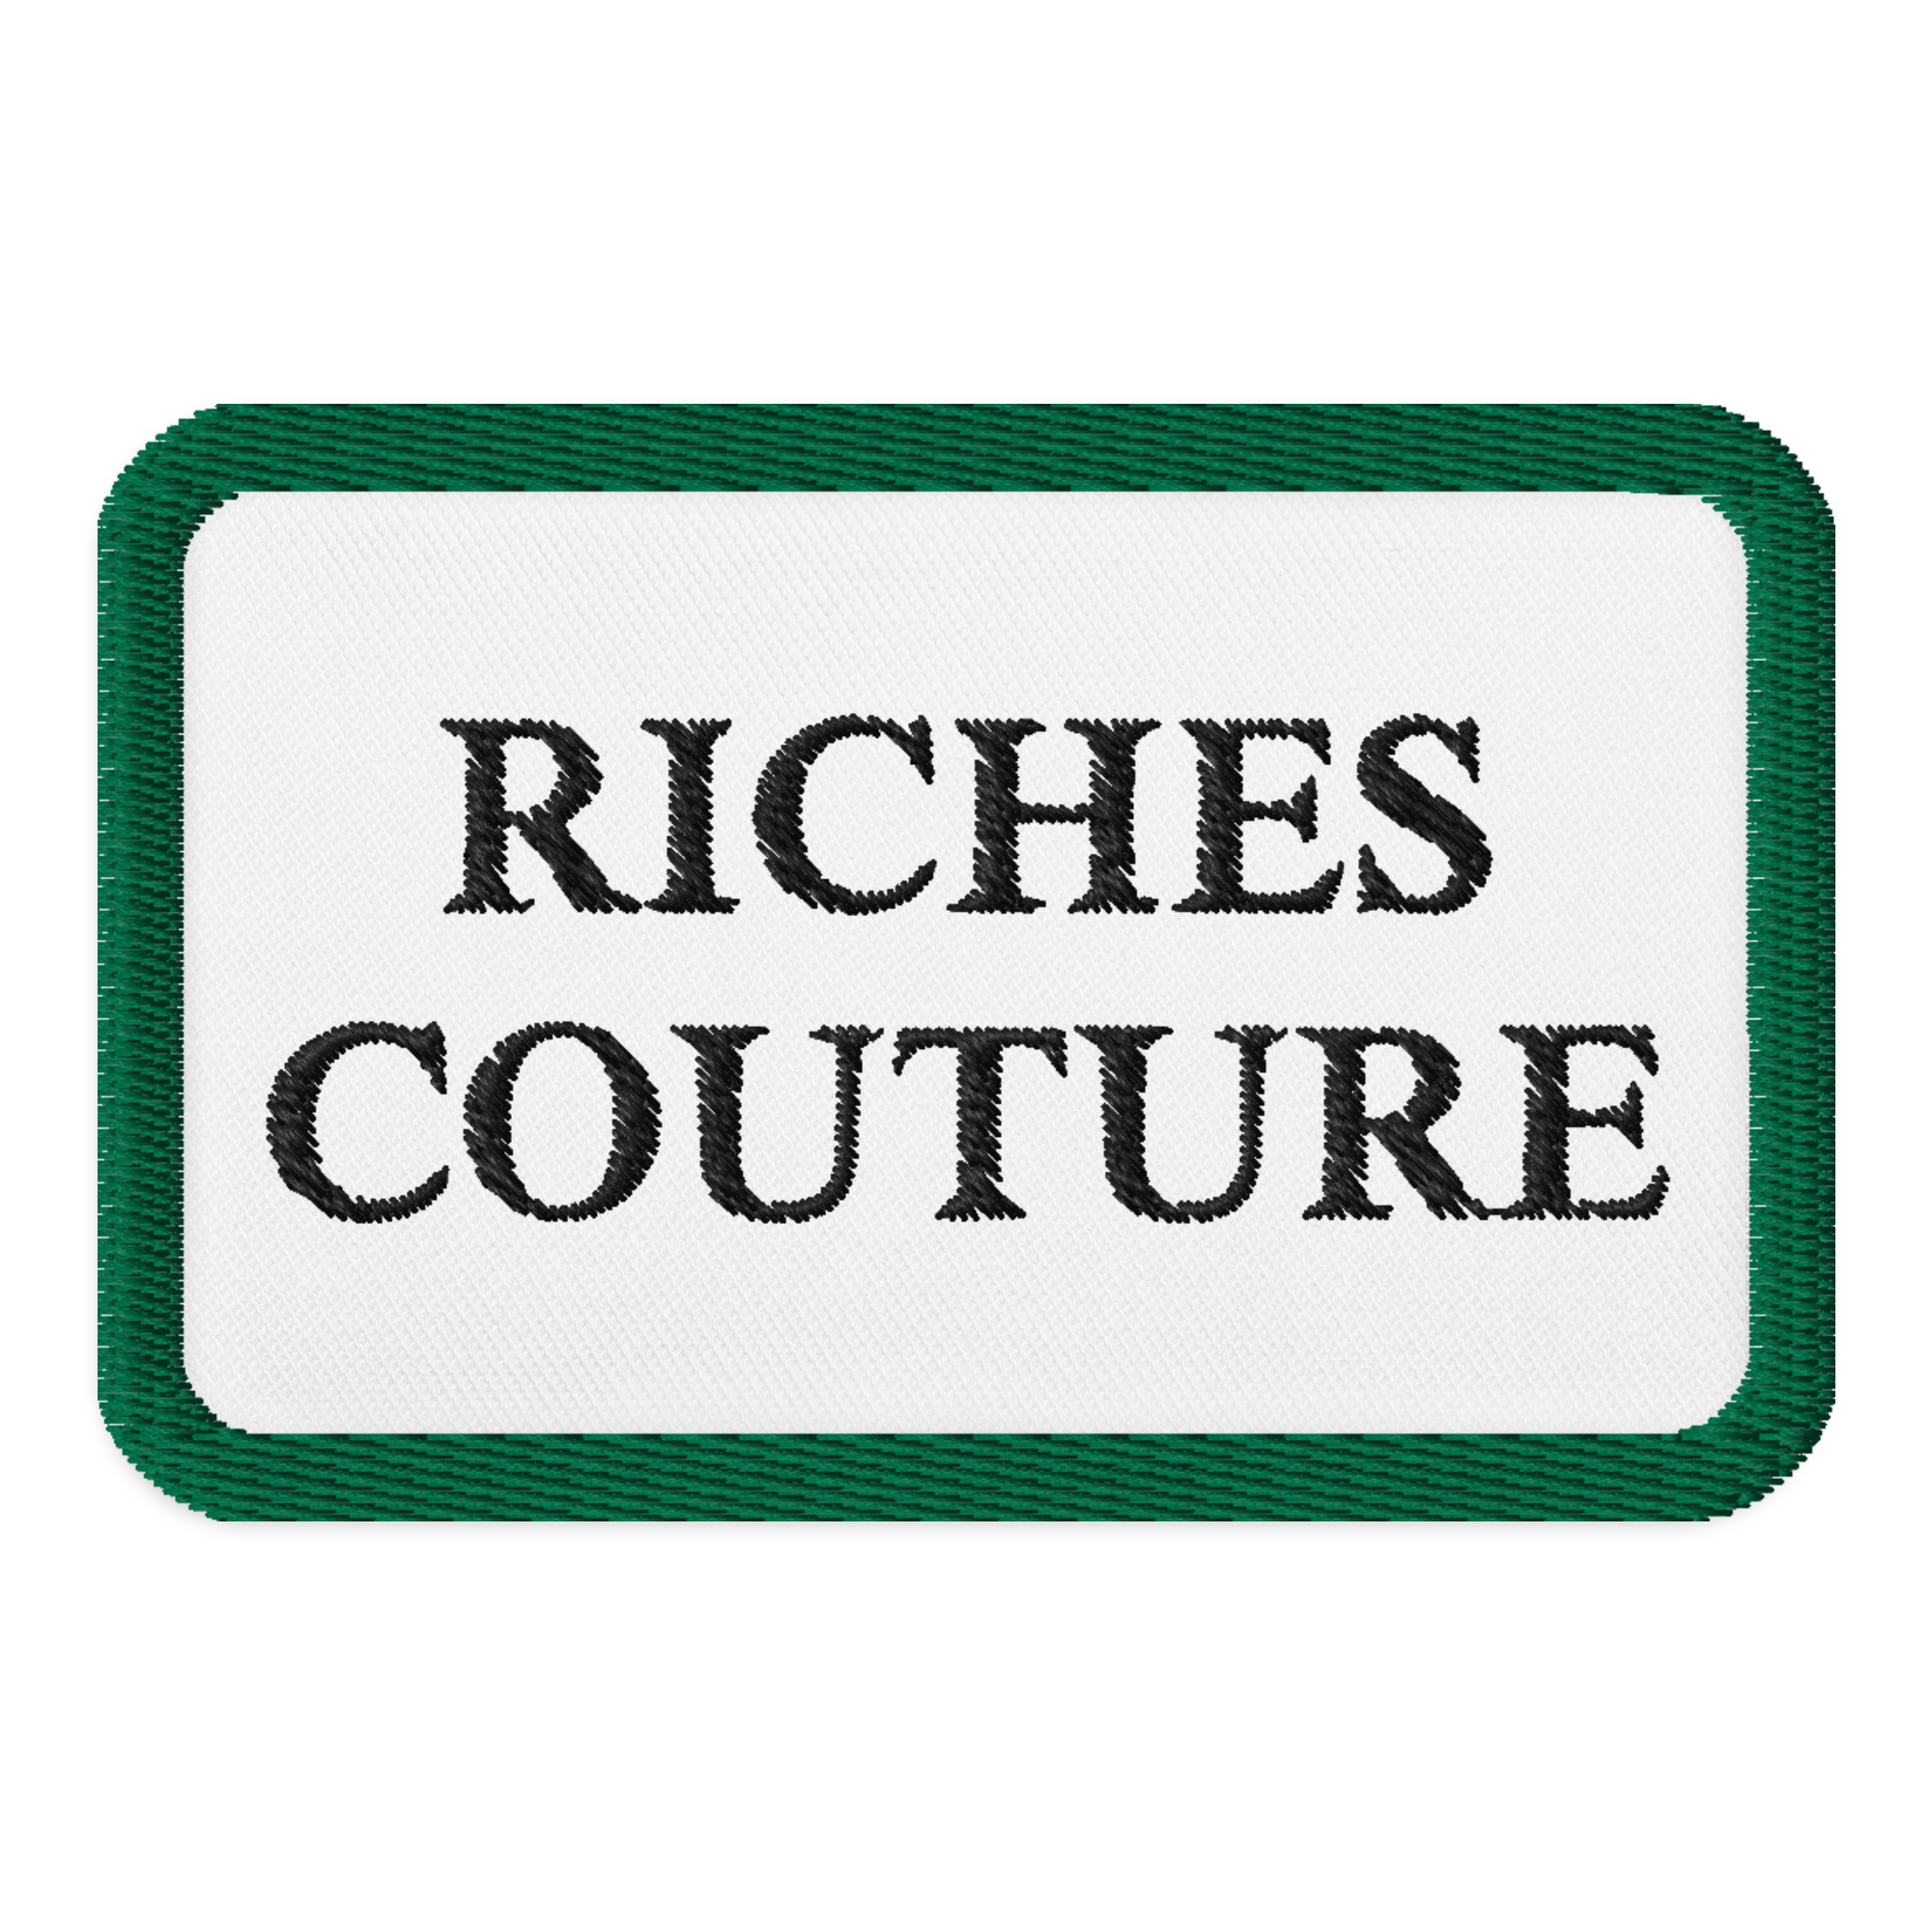 Riches Couture green embroidered patch 